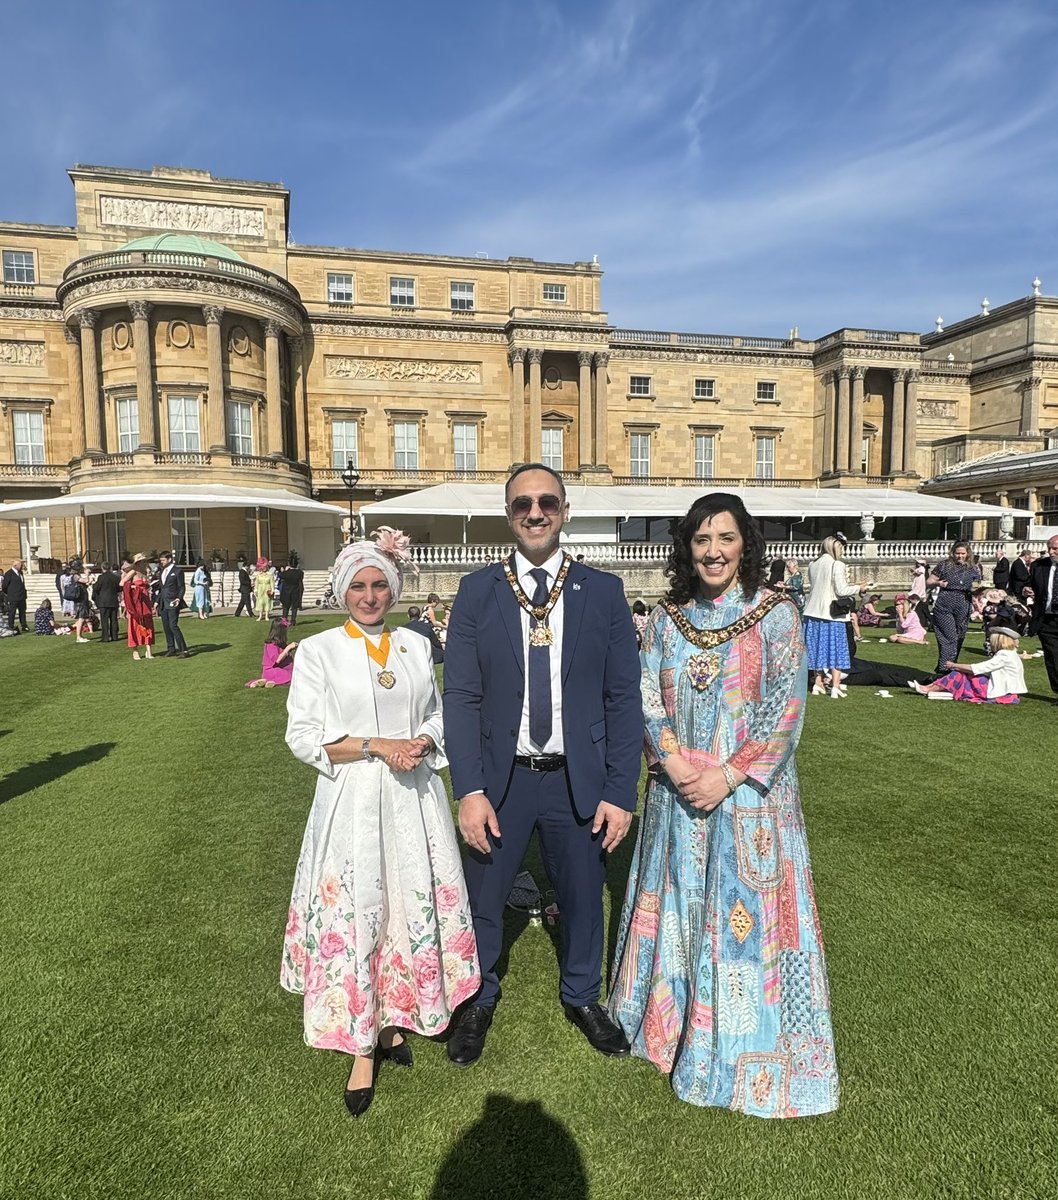 A privilege to attend the King & Queen's inaugural Royal Garden Party at Buckingham Palace today, including the Duke & Duchess of Edinburgh, the Princess Royal, & the Duke & Duchess of Gloucester. What an unforgettable experience! 🏰🌸 #RoyalGardenParty #BuckinghamPalace